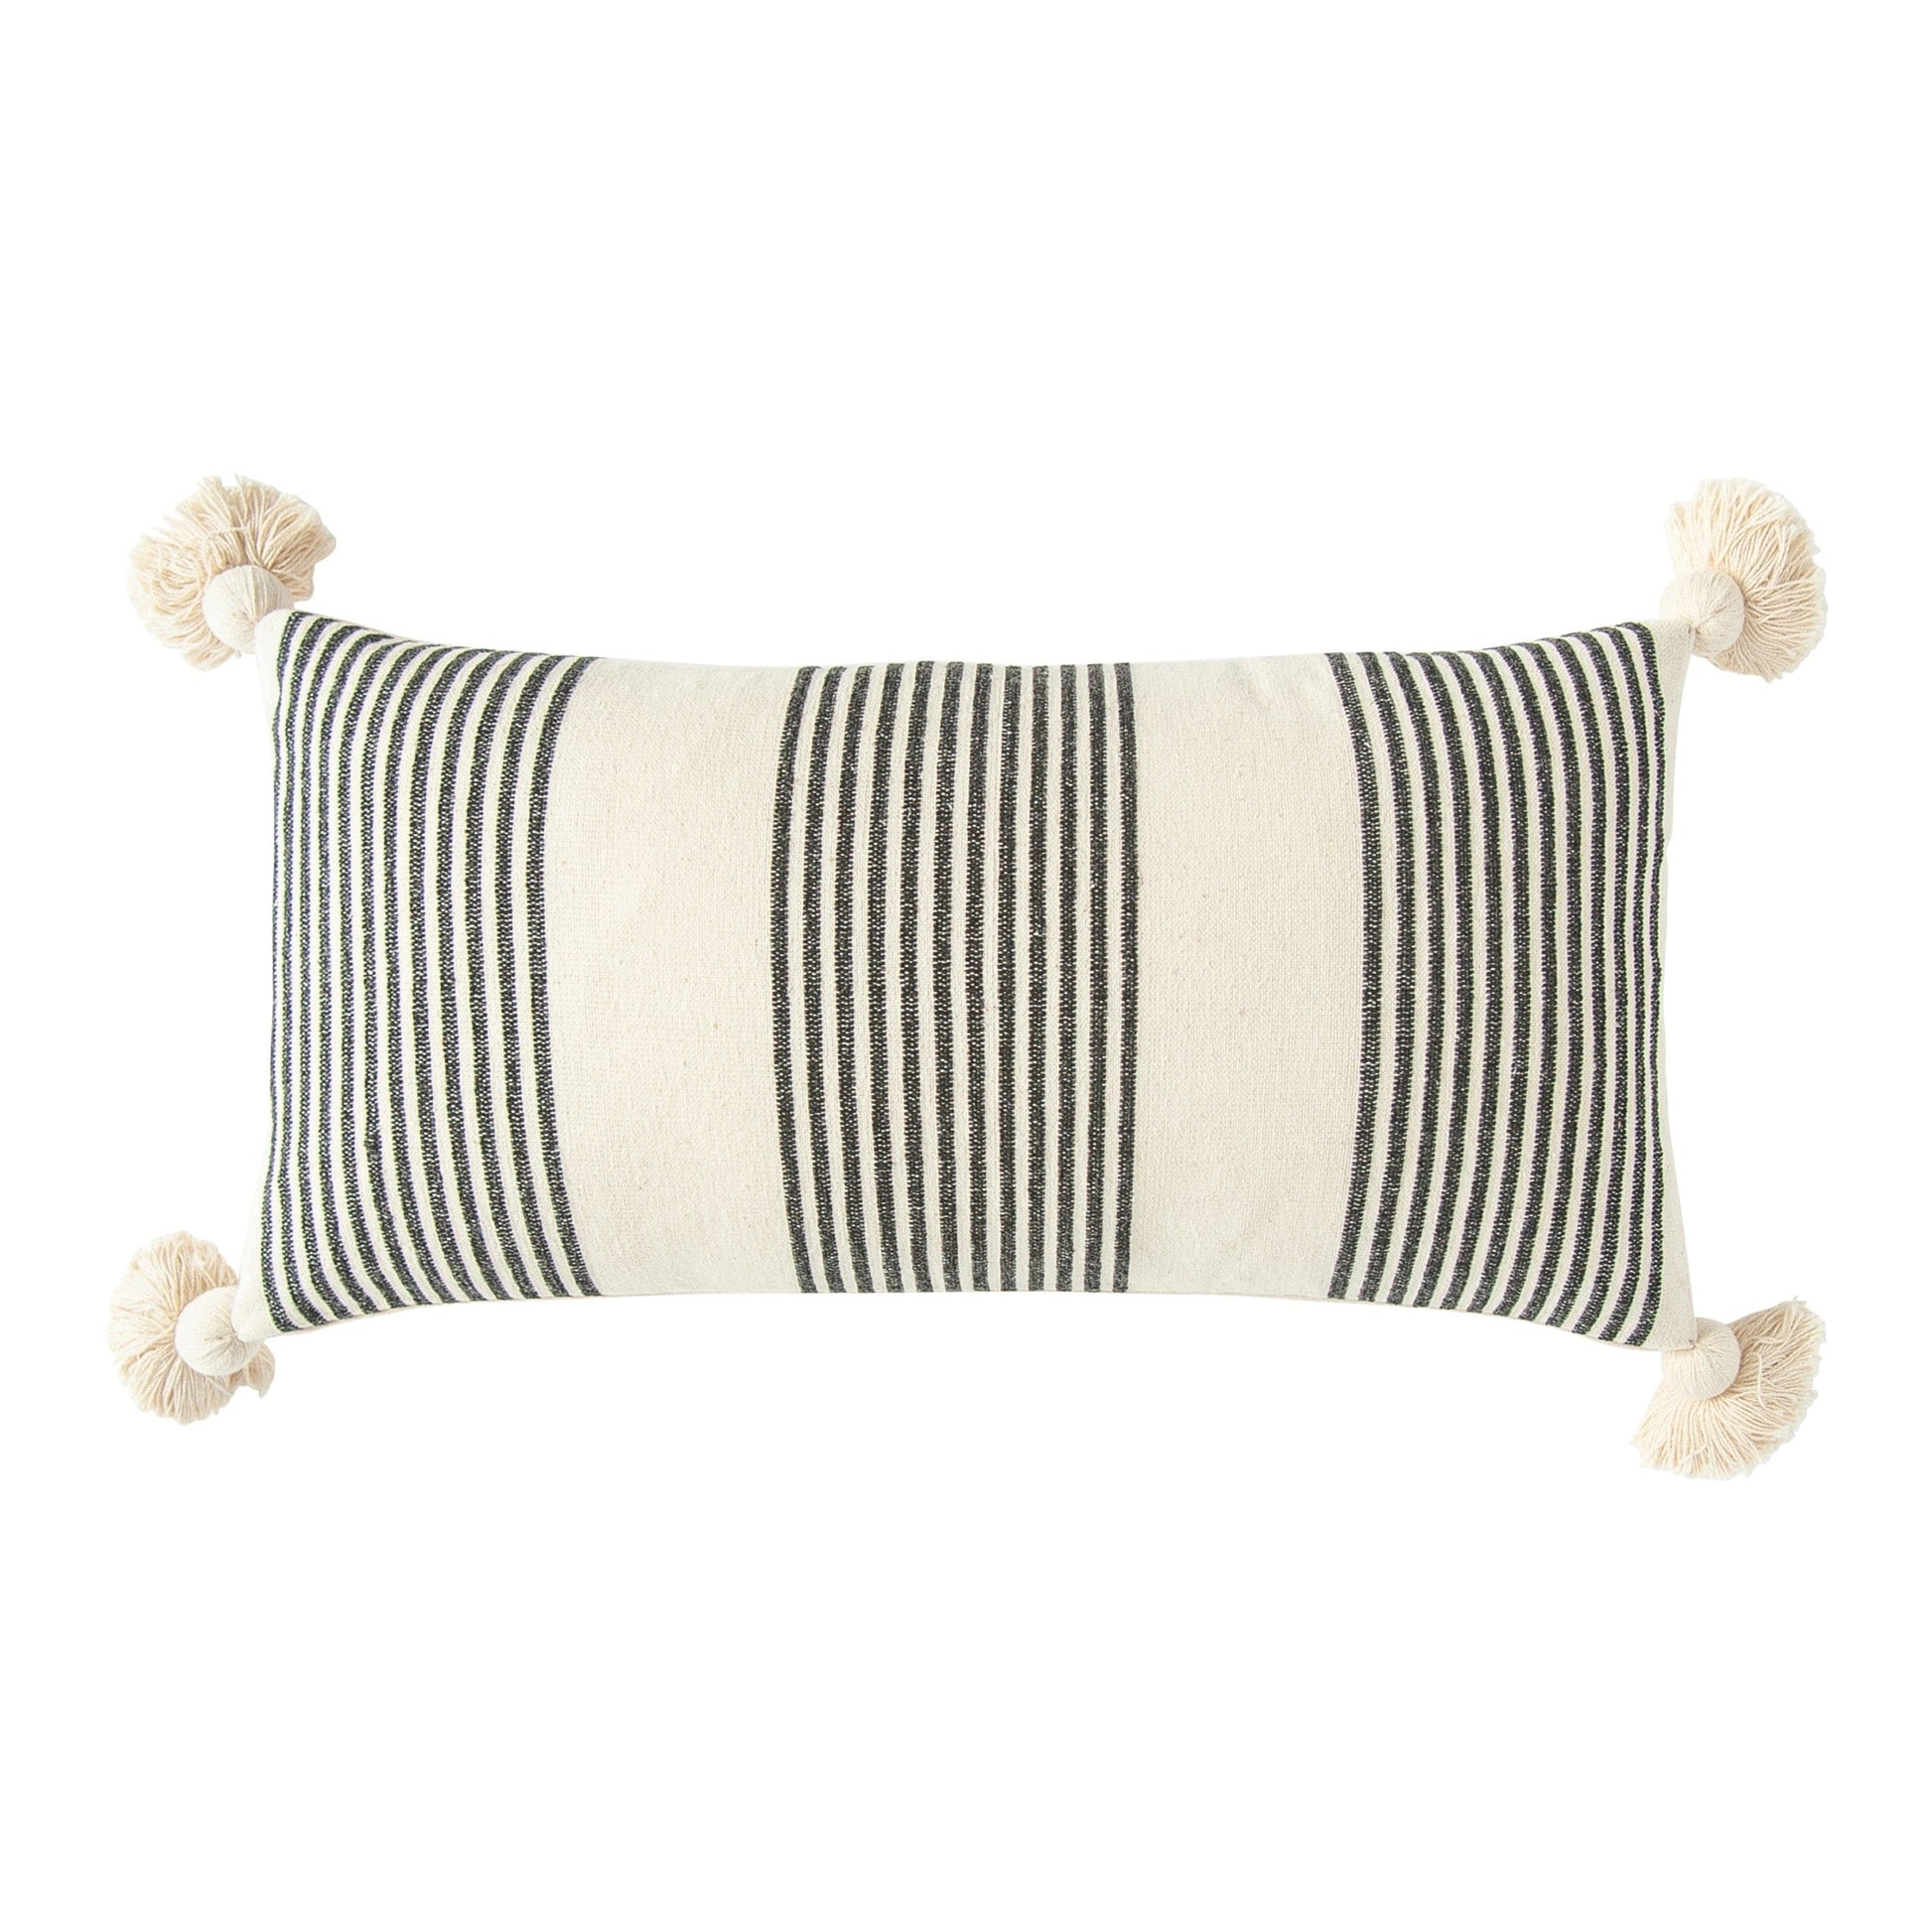 Black and White Stripe Lumbar Pillow 28"L x 14"H - Five and Divine